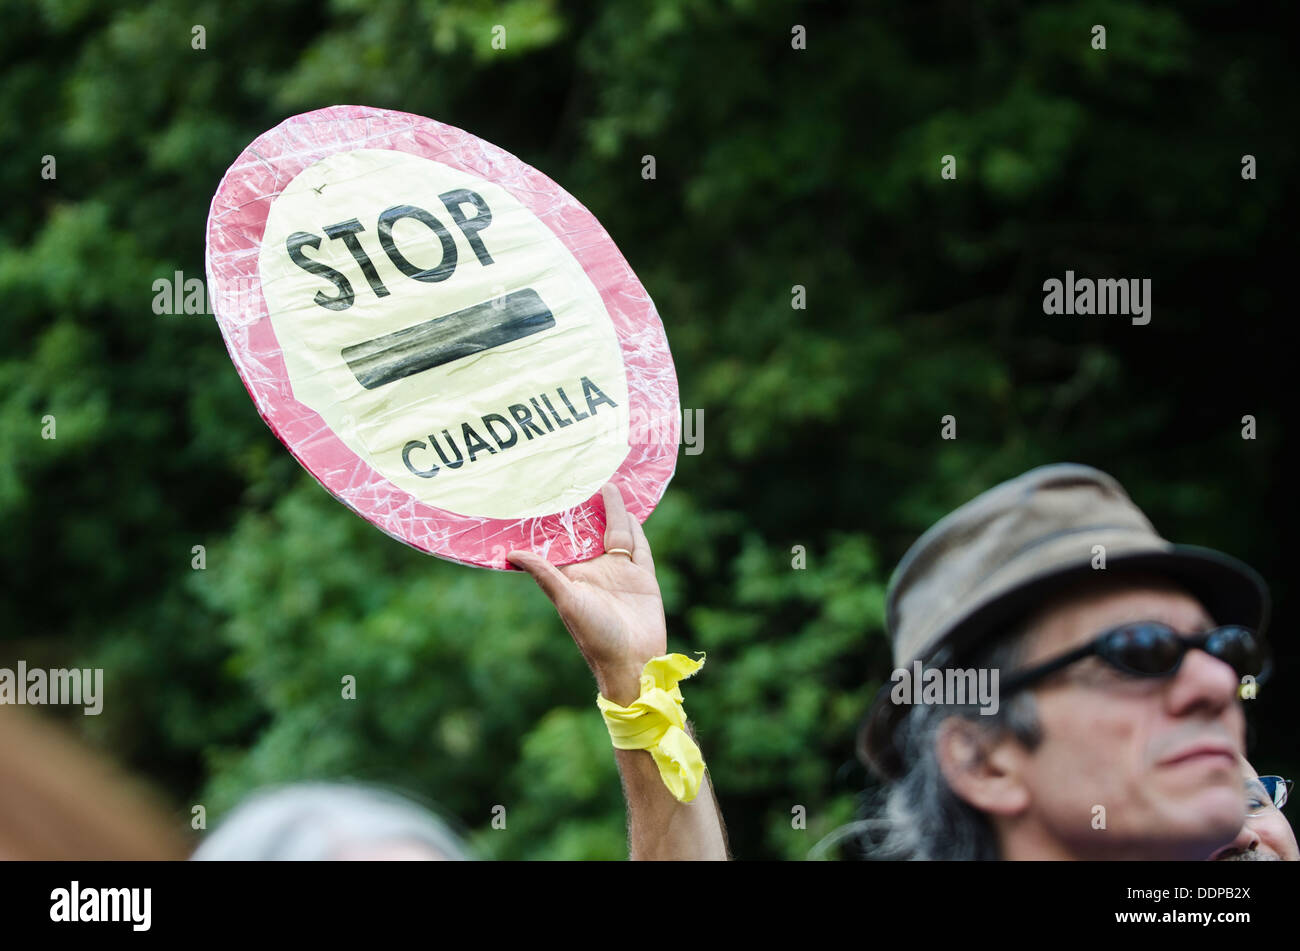 Stop Cuadrilla sign at 'Belt It Out Balcombe' event, Balcombe, West Sussex, for the anti-fracking campaign, 11th August 2013 Stock Photo